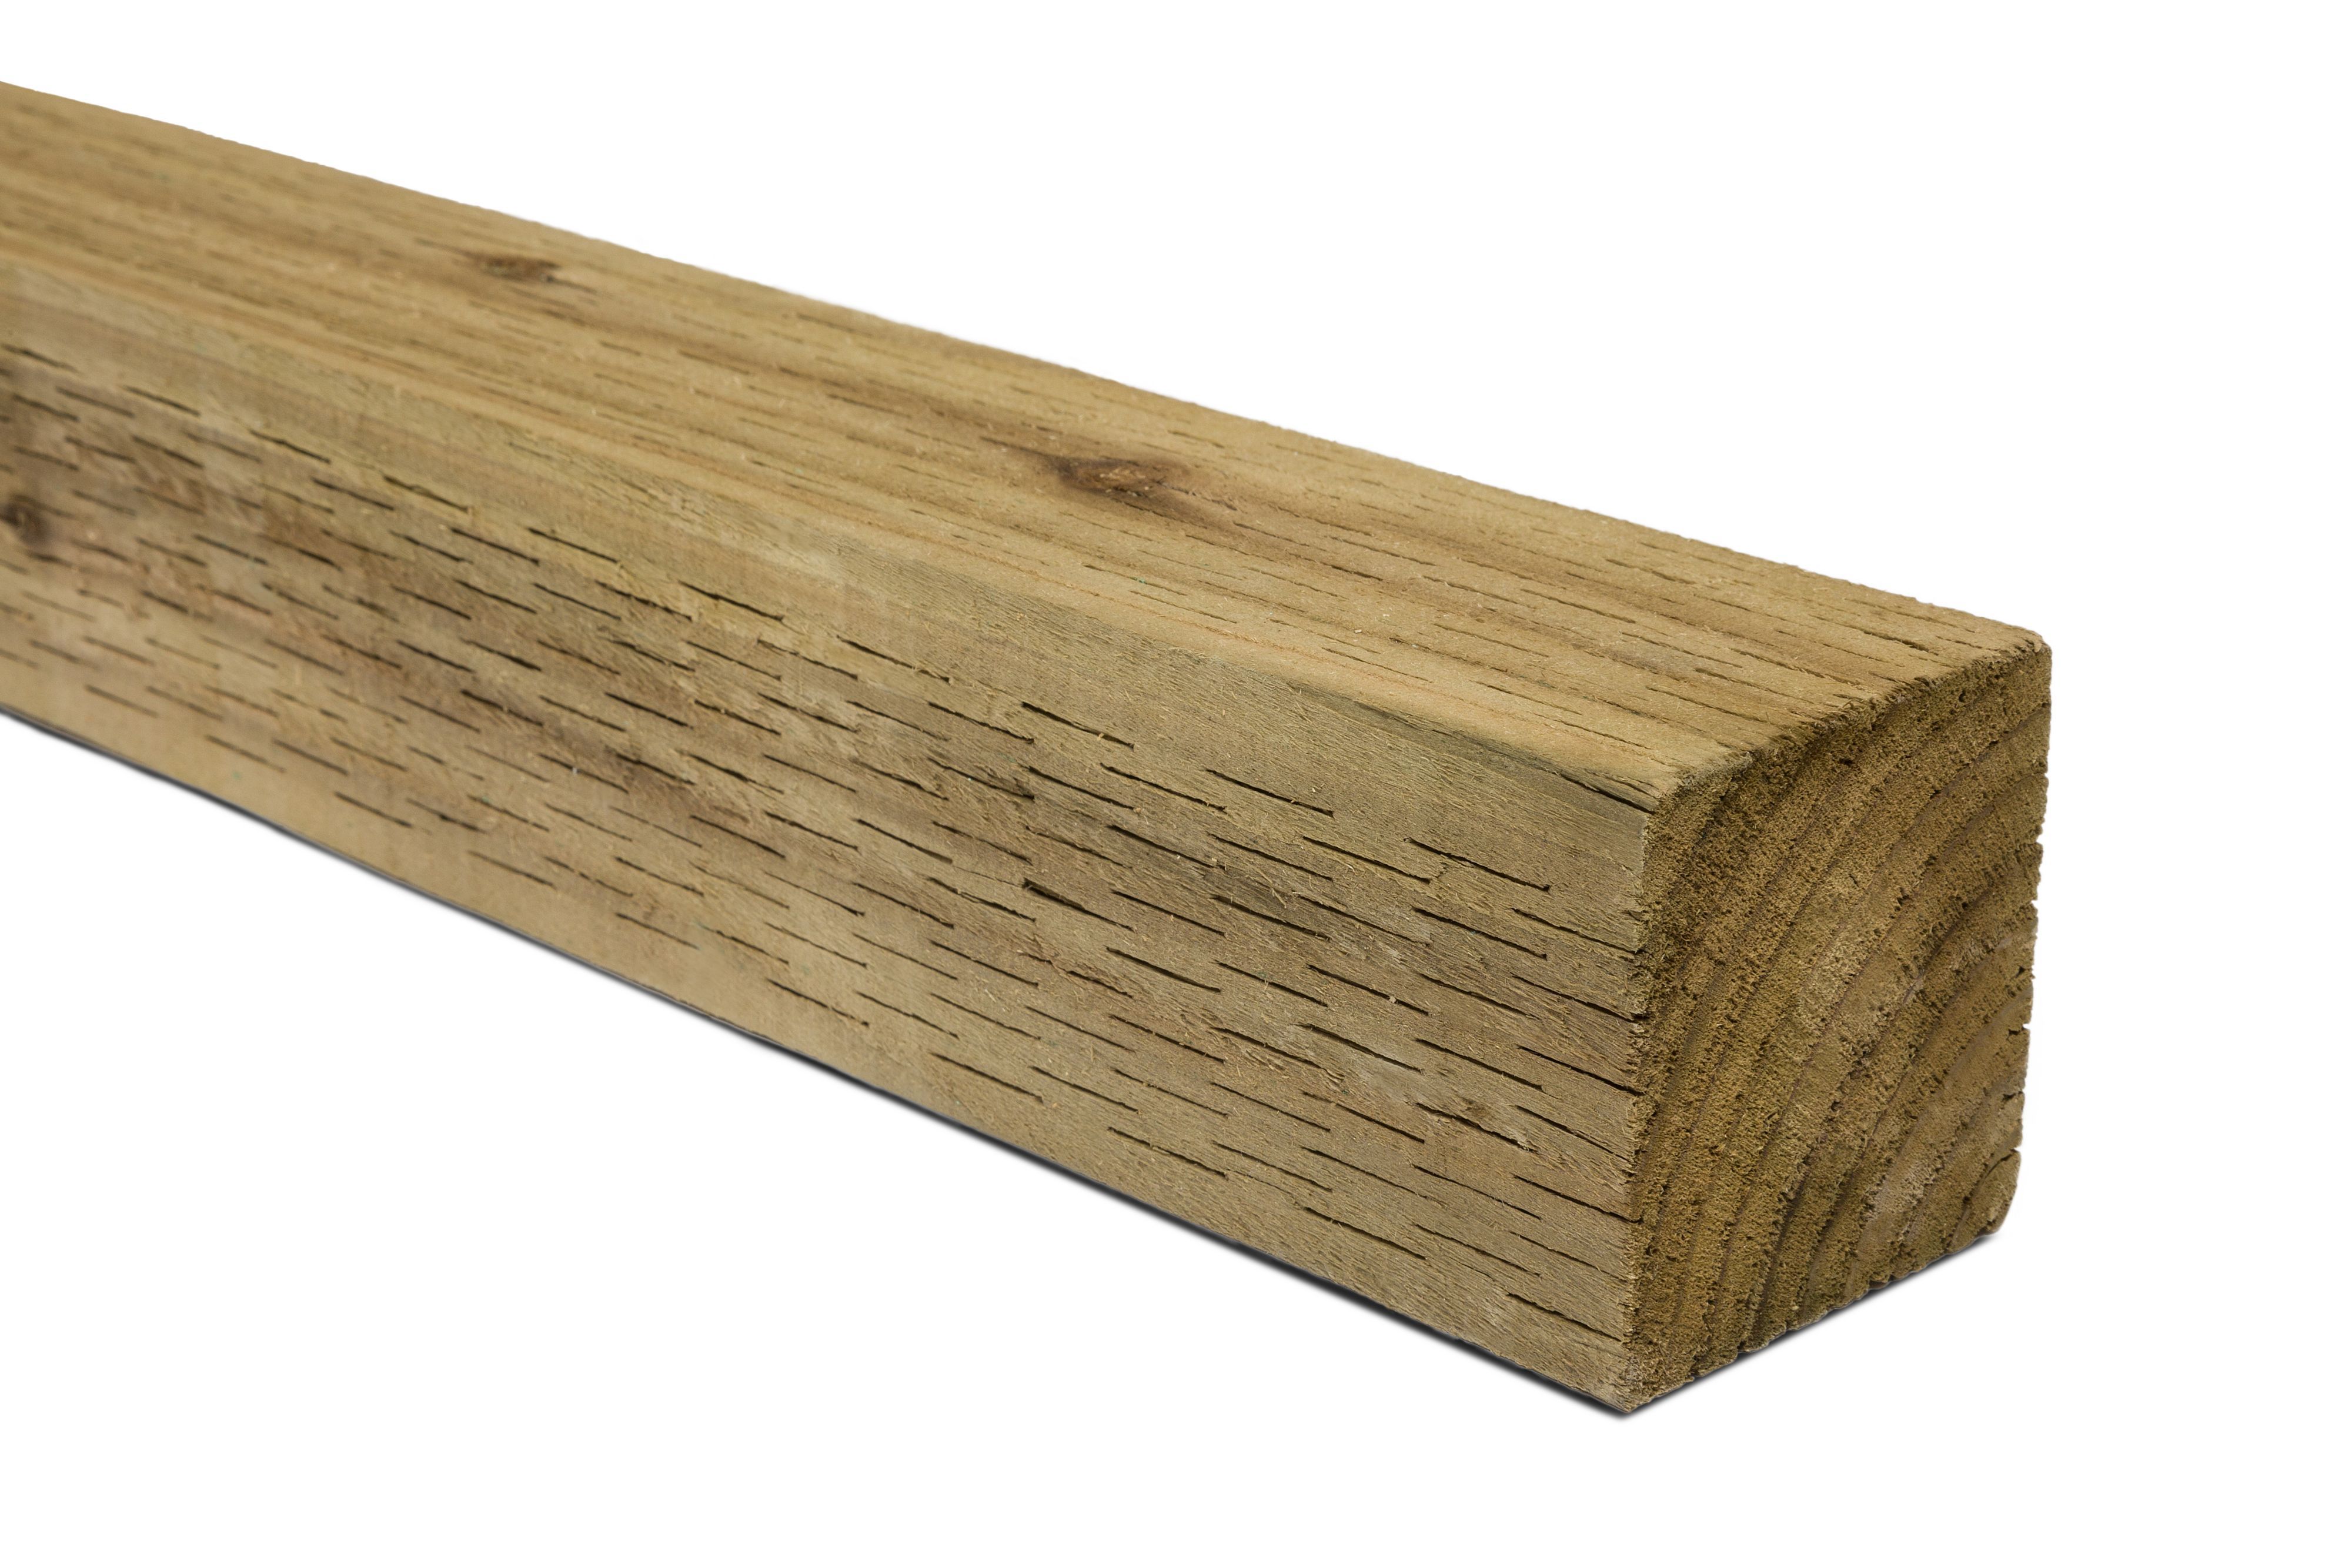 Sawn Green Timber Fence Post (H)2.4M (W)75 mm, Pack Of 2